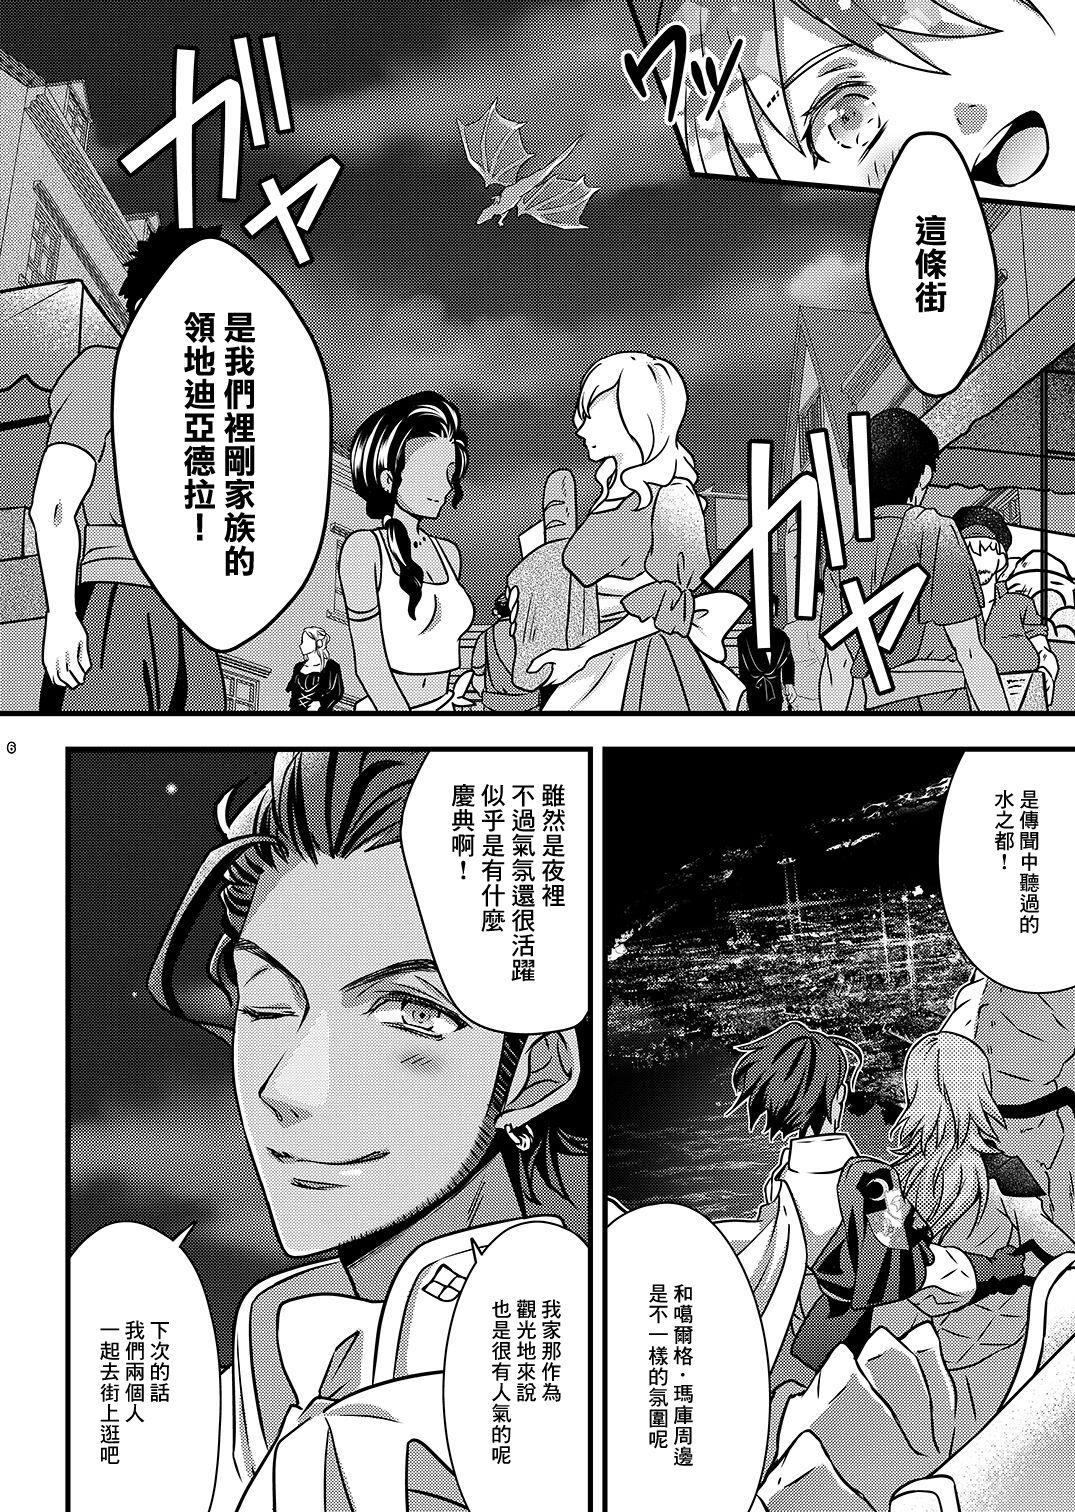 Outdoor Sex Yoake no Joukei - Fire emblem three houses Young Old - Page 5